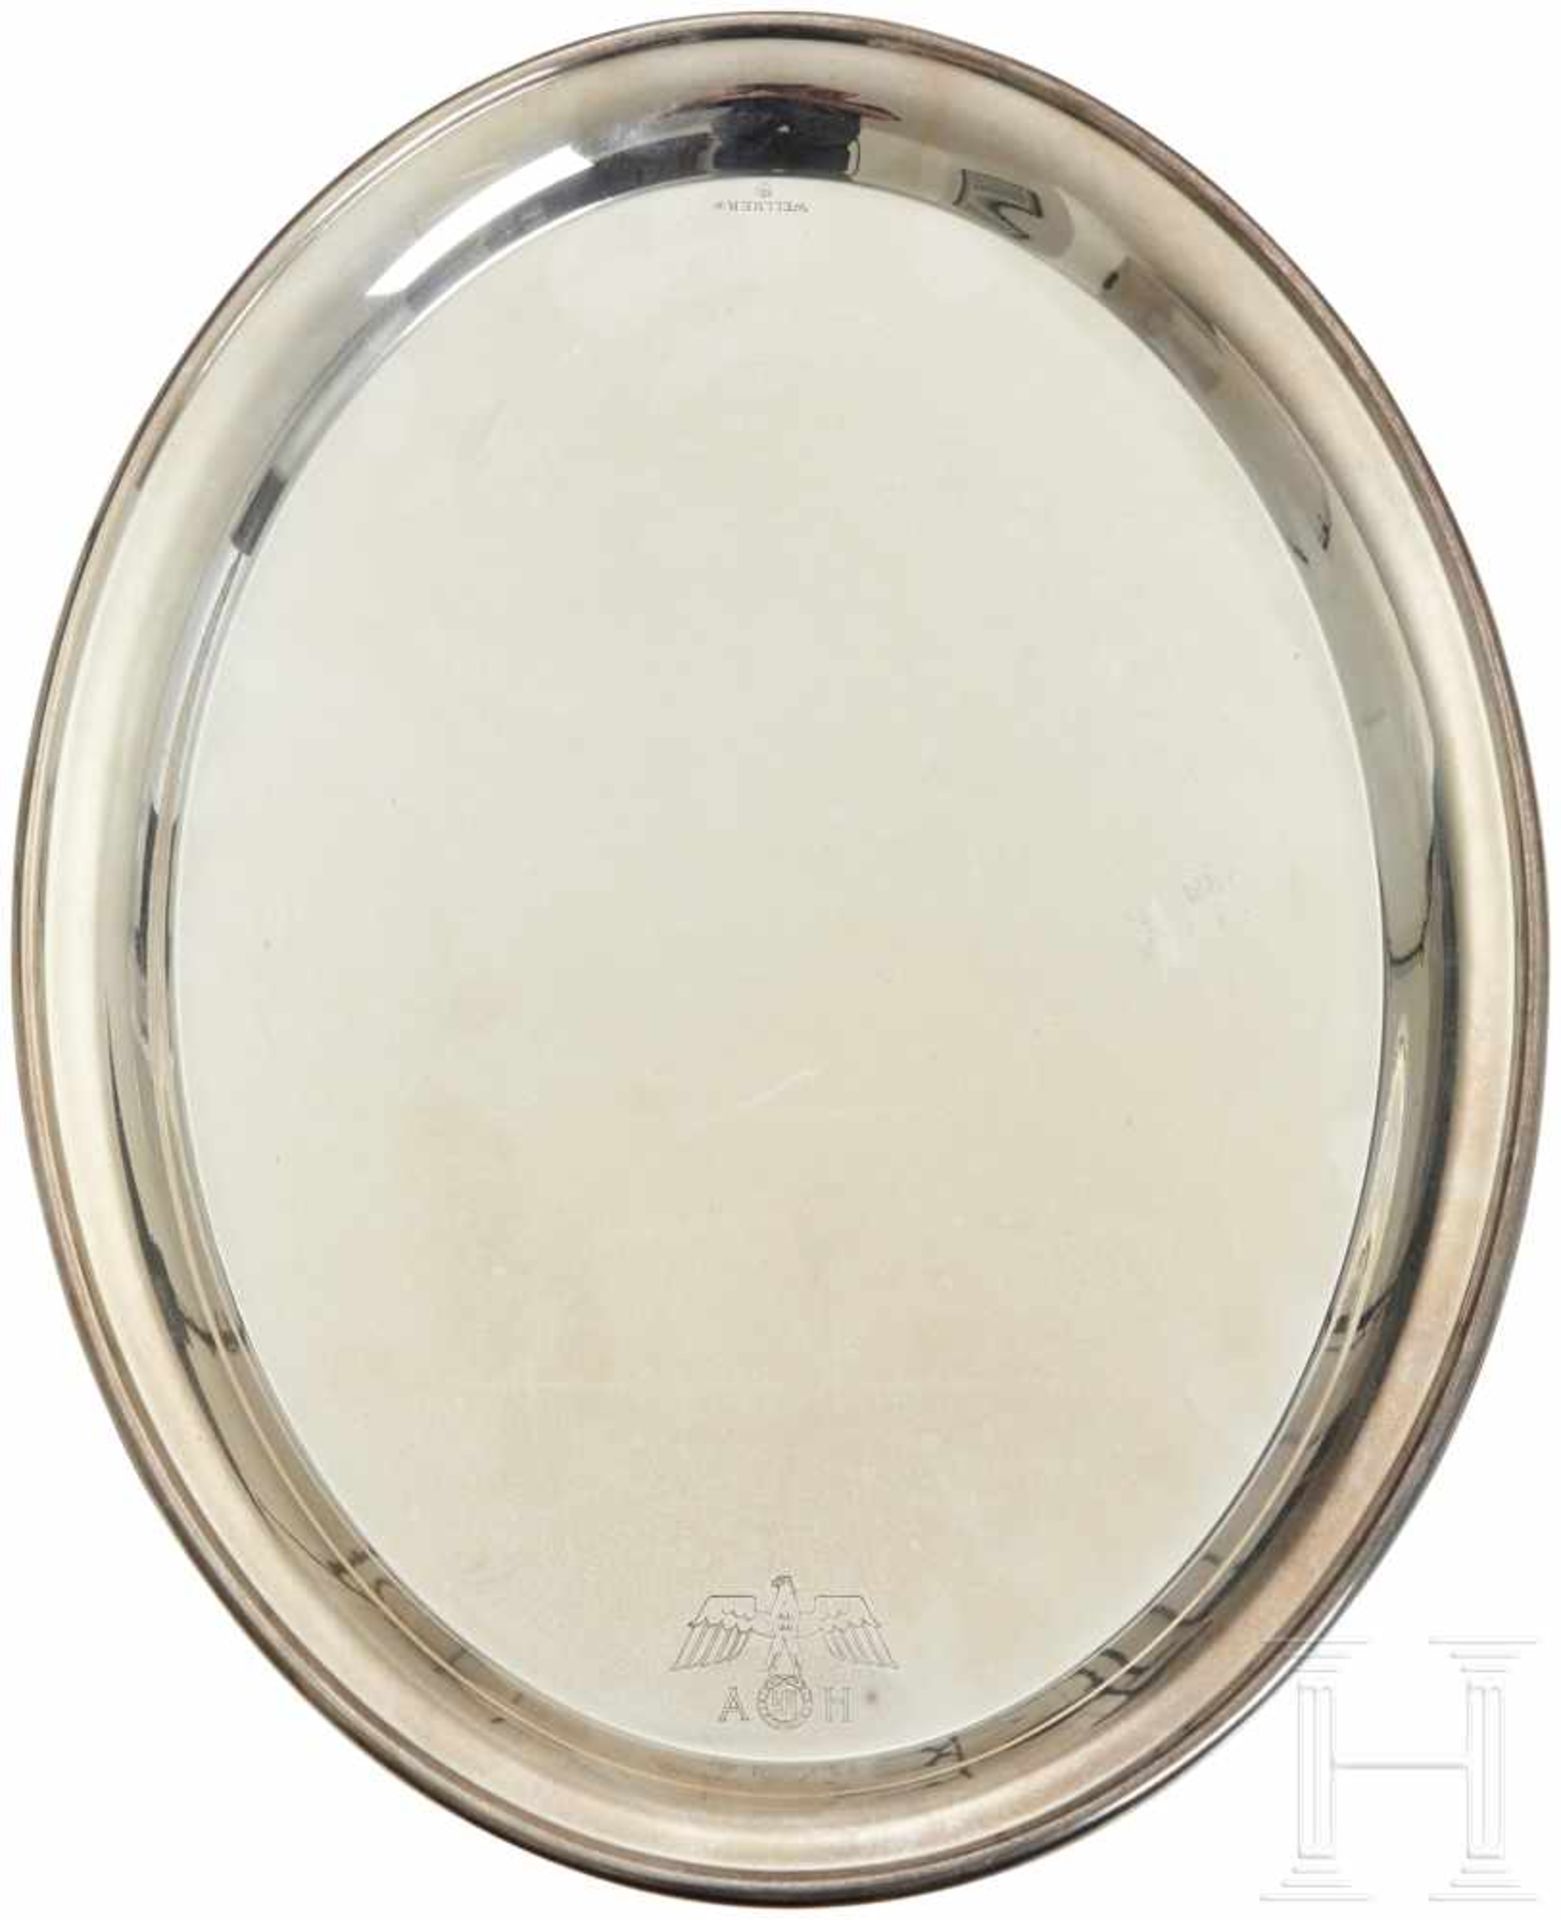 Adolf Hitler - a Small Serving Tray from his Personal Silver ServiceA small, oval tray with national